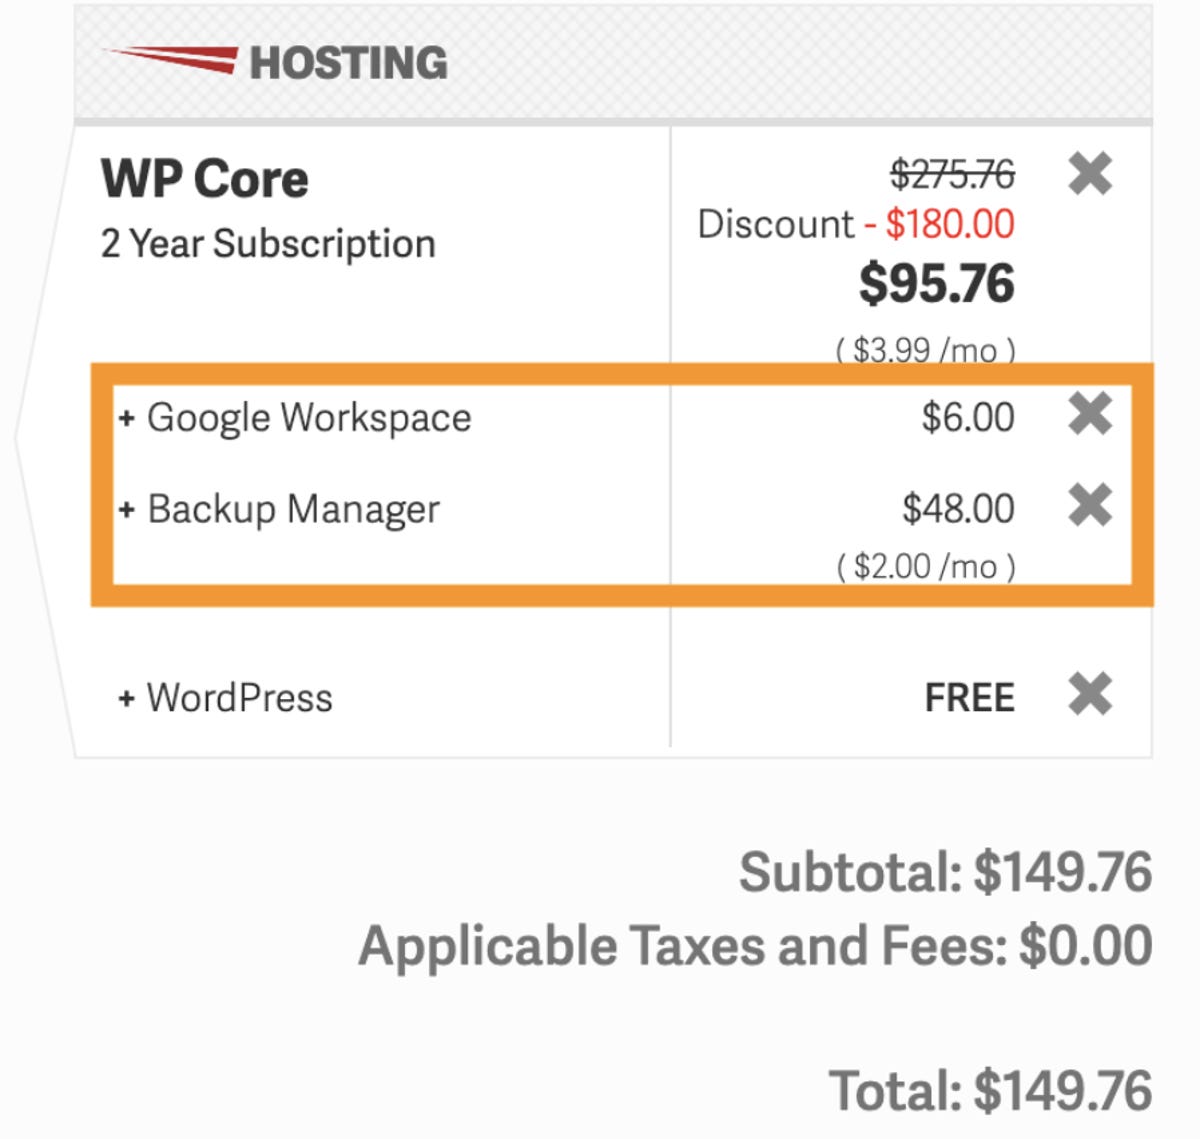 A receipt from InMotion Hosting showing the add-ons Backup Manager and Google Workspace